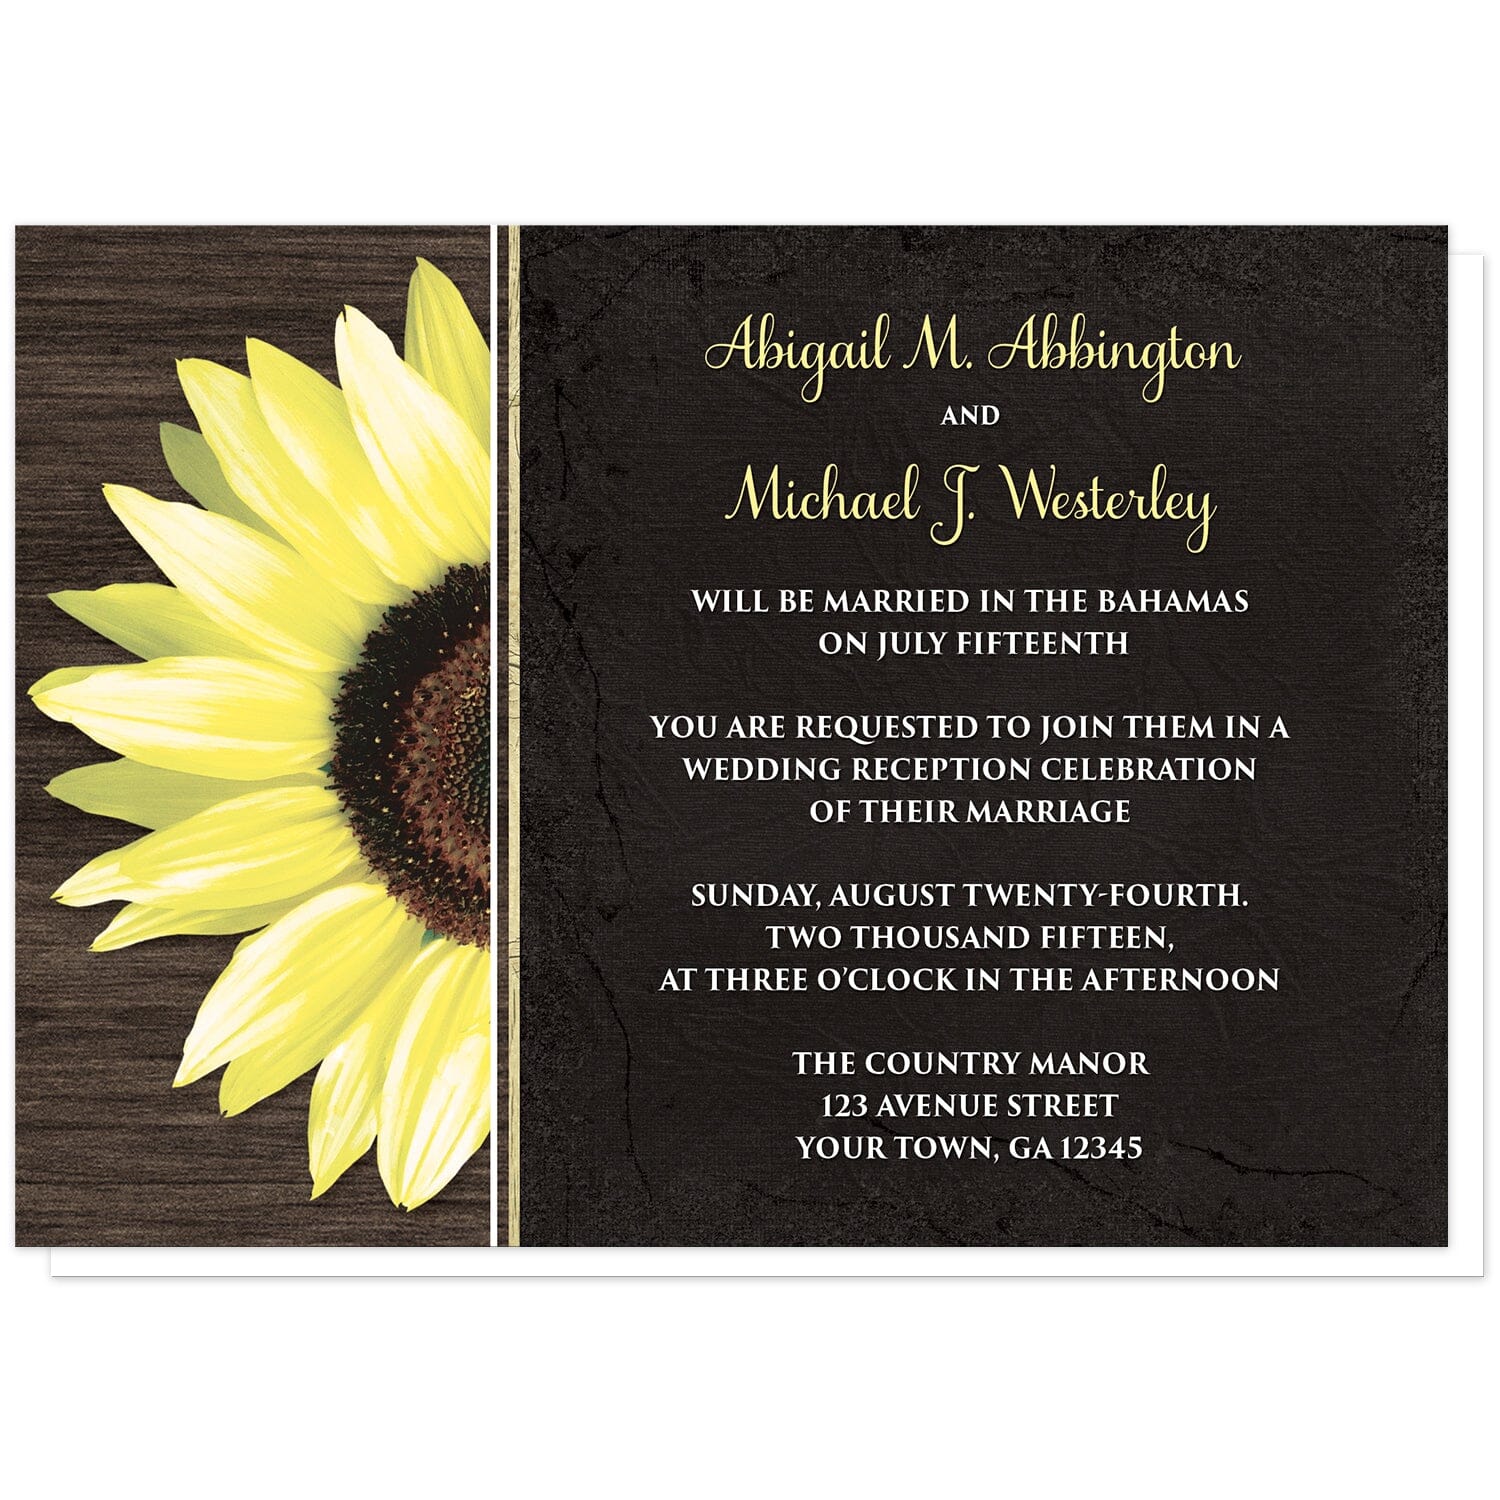 Rustic Sunflower with Black Reception Only Invitations at Artistically Invited. Country-inspired rustic sunflower with black reception only invitations featuring a vibrant bright yellow sunflower over a textured dark brown wood design along the left side. Your personalized post-wedding reception details are custom printed in yellow and white over a tattered black cloth illustration to the right of the sunflower.